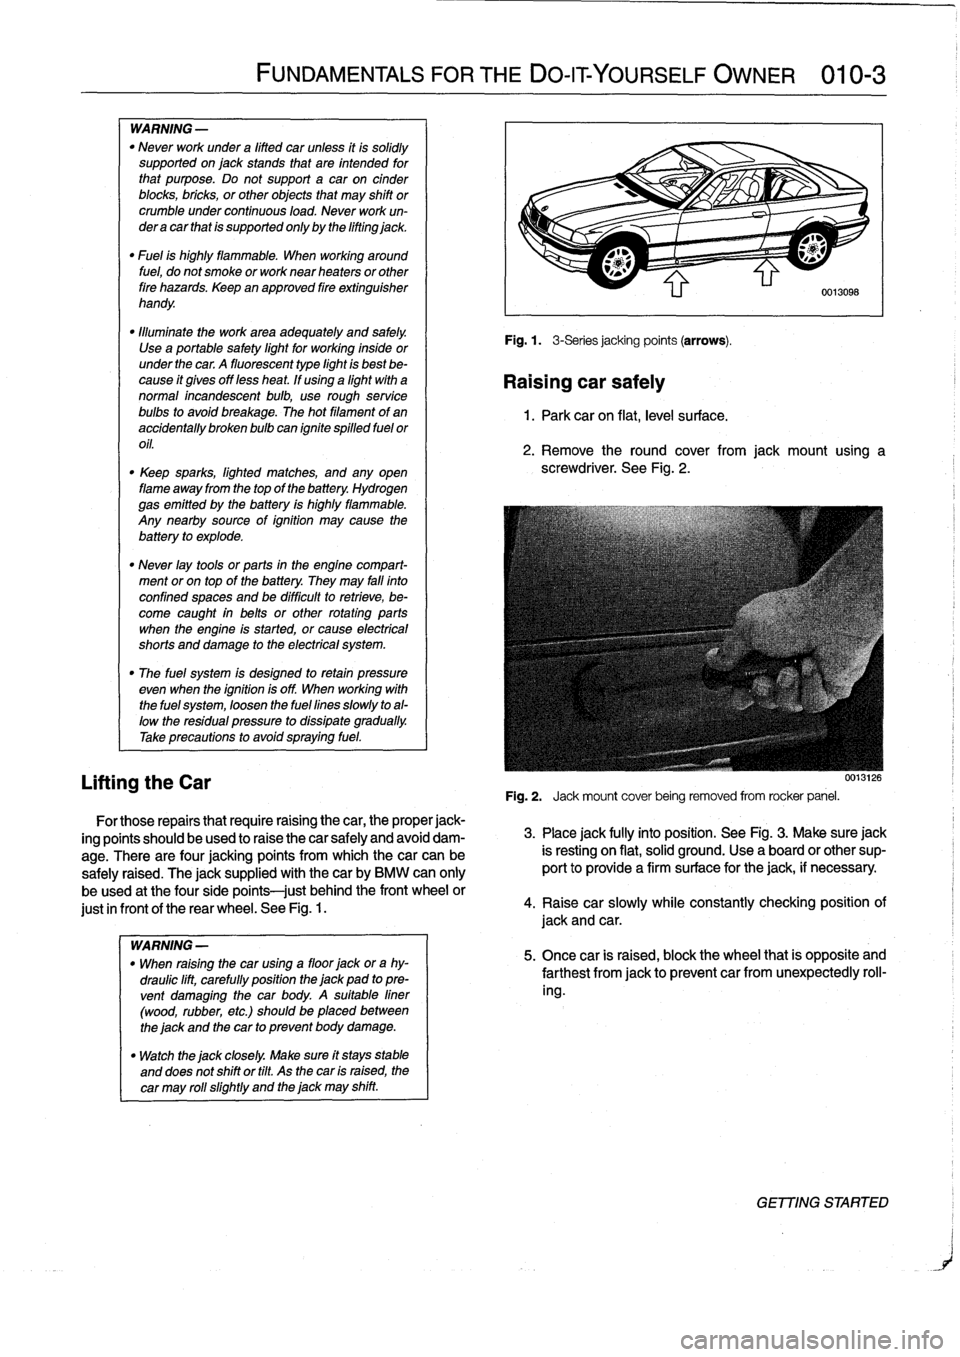 BMW 318i 1997 E36 Workshop Manual 
WARNING
-

"
Never
work
under
a
lifted
car
unless
it
is
solidly
supported
on
jack
stands
that
are
intended
for
that
purpose
.
Do
not
support
a
car
on
cinder
blocks,
bricks,
or
other
objects
that
may
